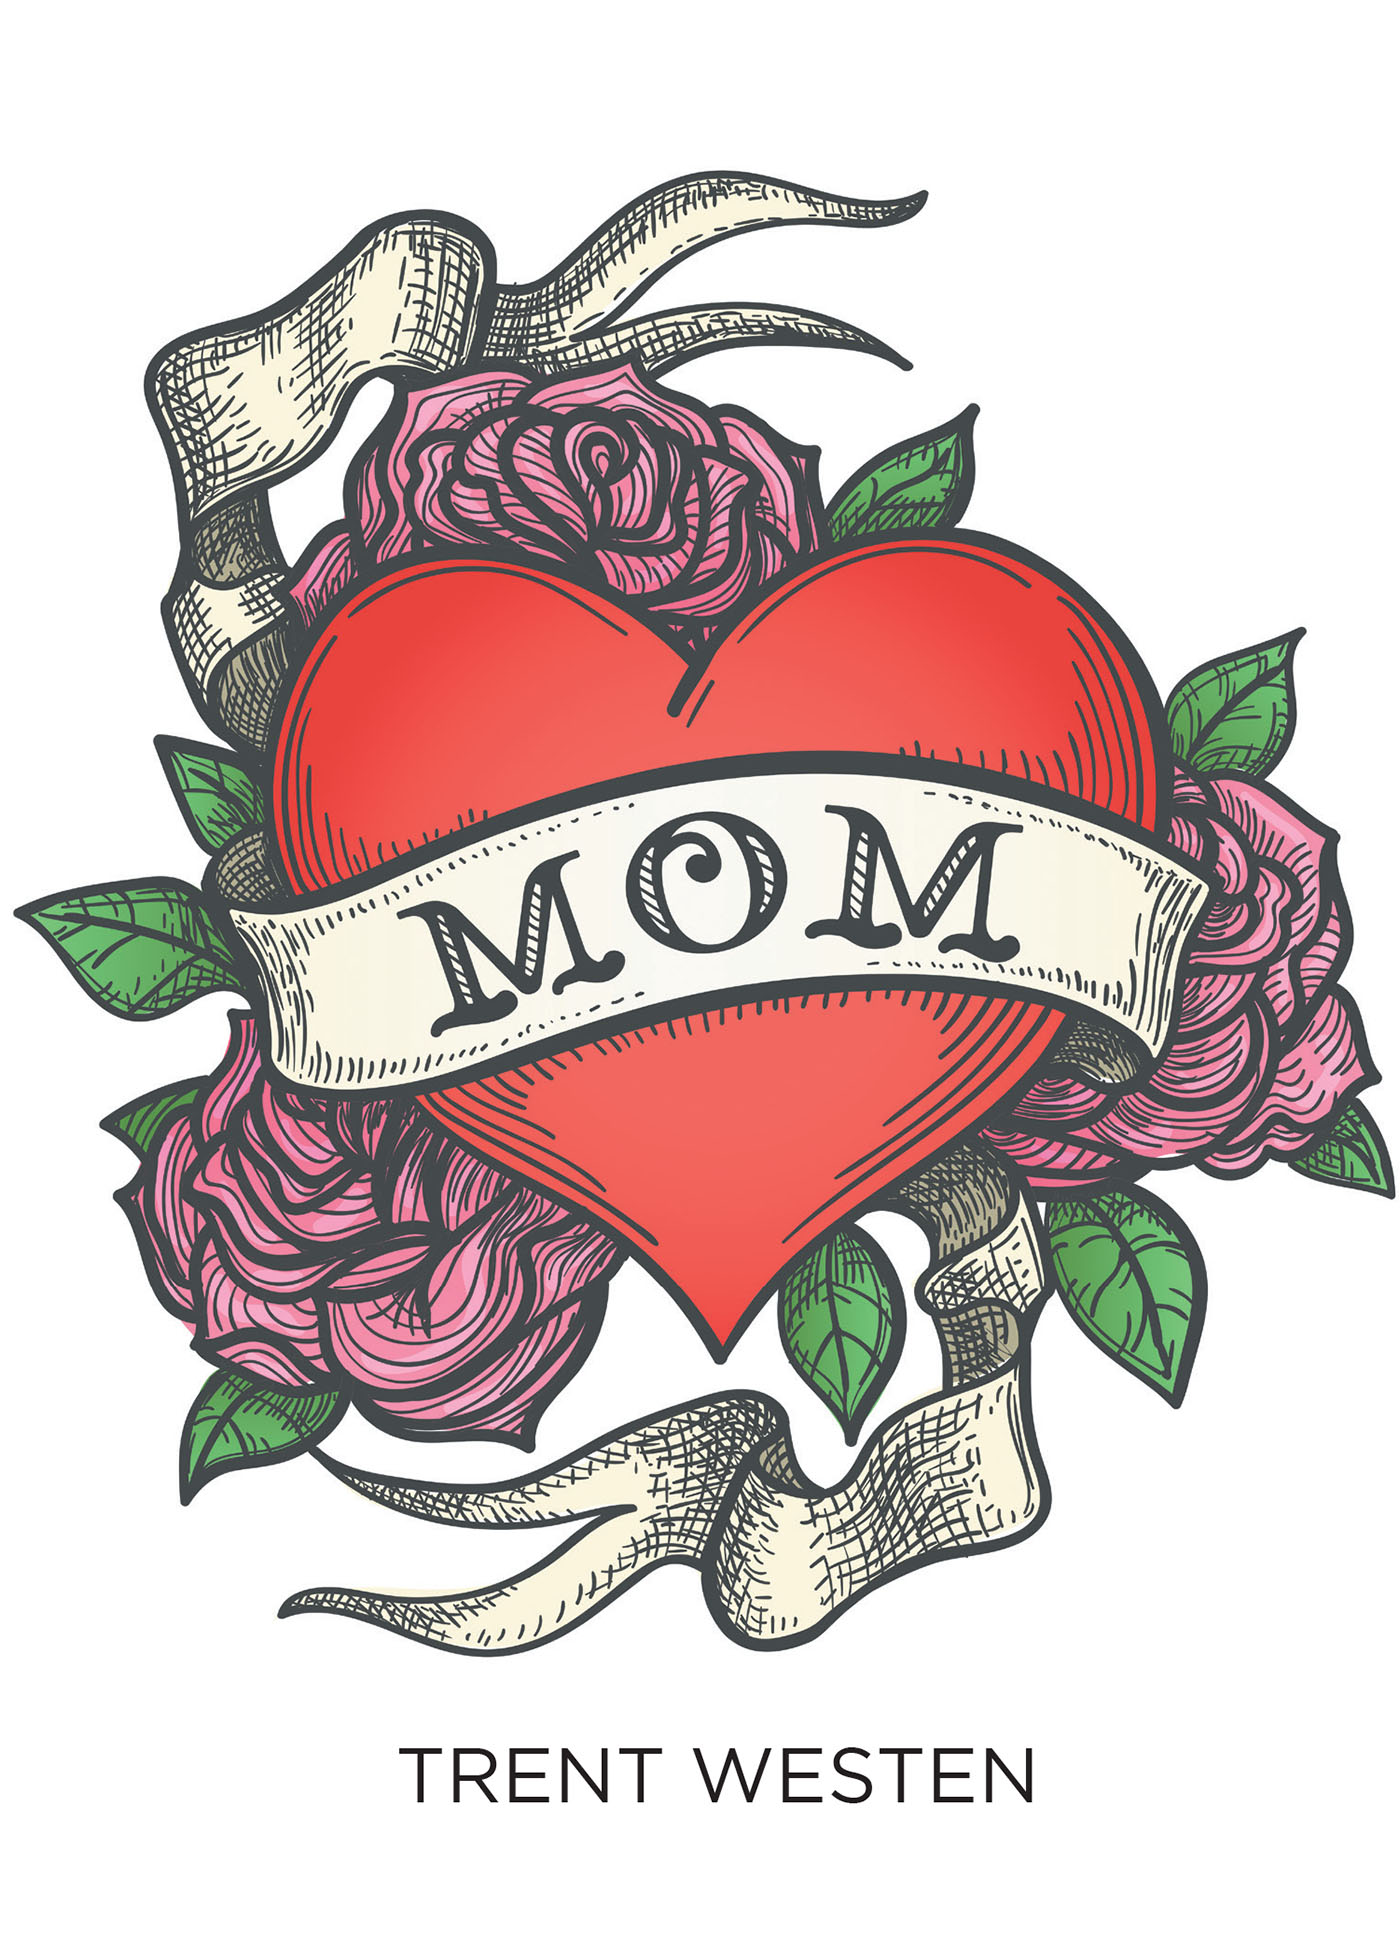 Author Trent Westen’s New Book, "Mom," is a Beautiful Tribute from the Author to His Mother, Expressing His Eternal Love for All She Has Done for Him